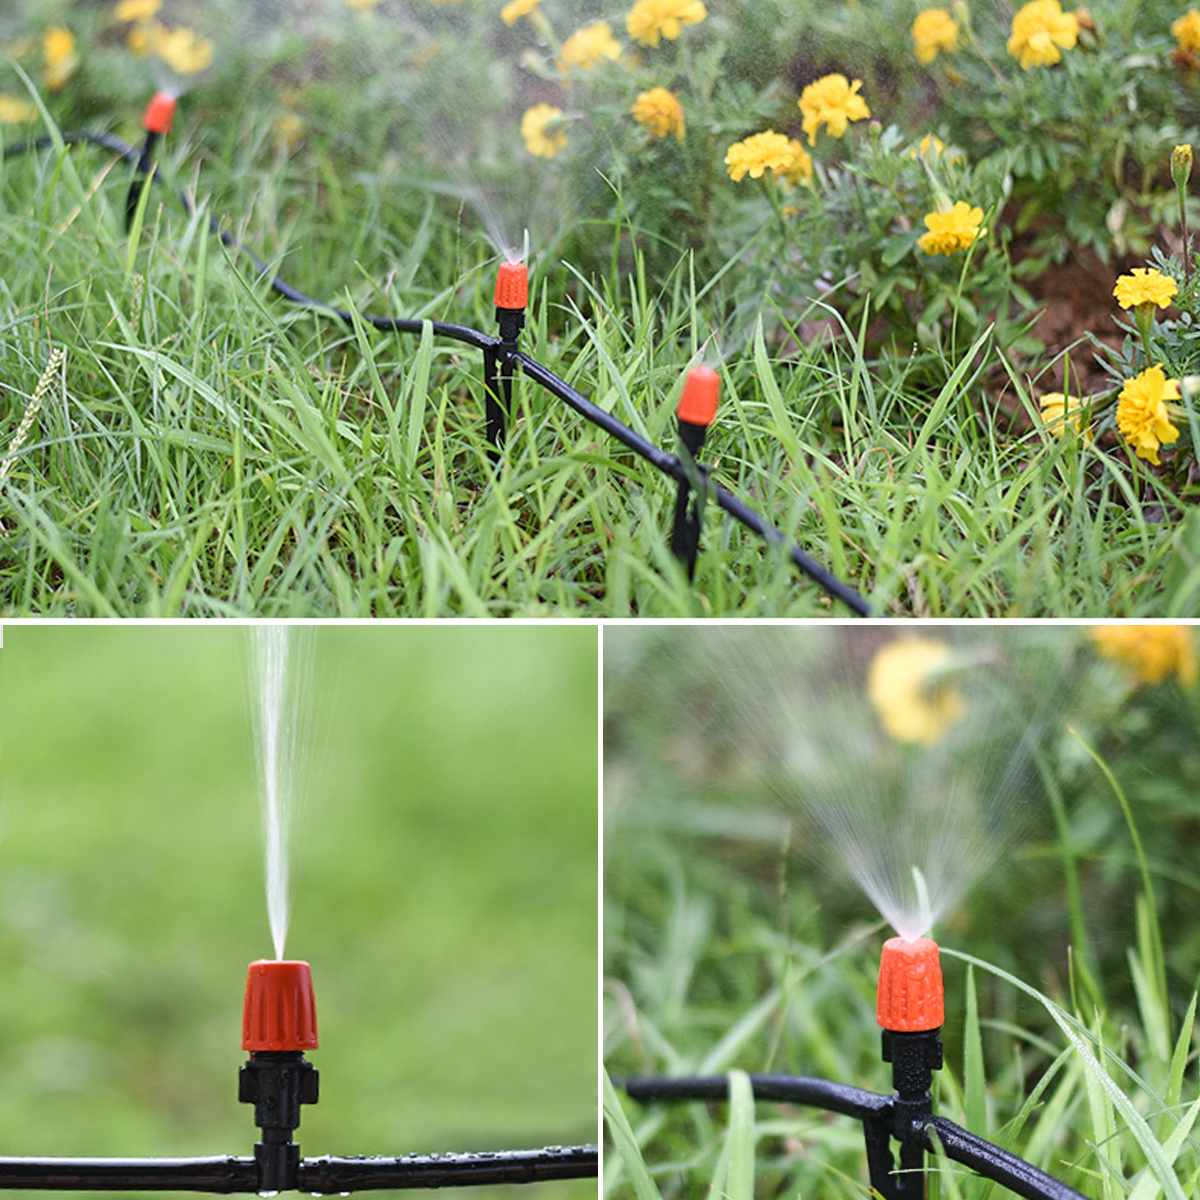 10m-25m DIY Drip Irrigation System Automatic Watering Garden Hose Micro Drip Watering Kits with Adjustable Drippers Irrigating